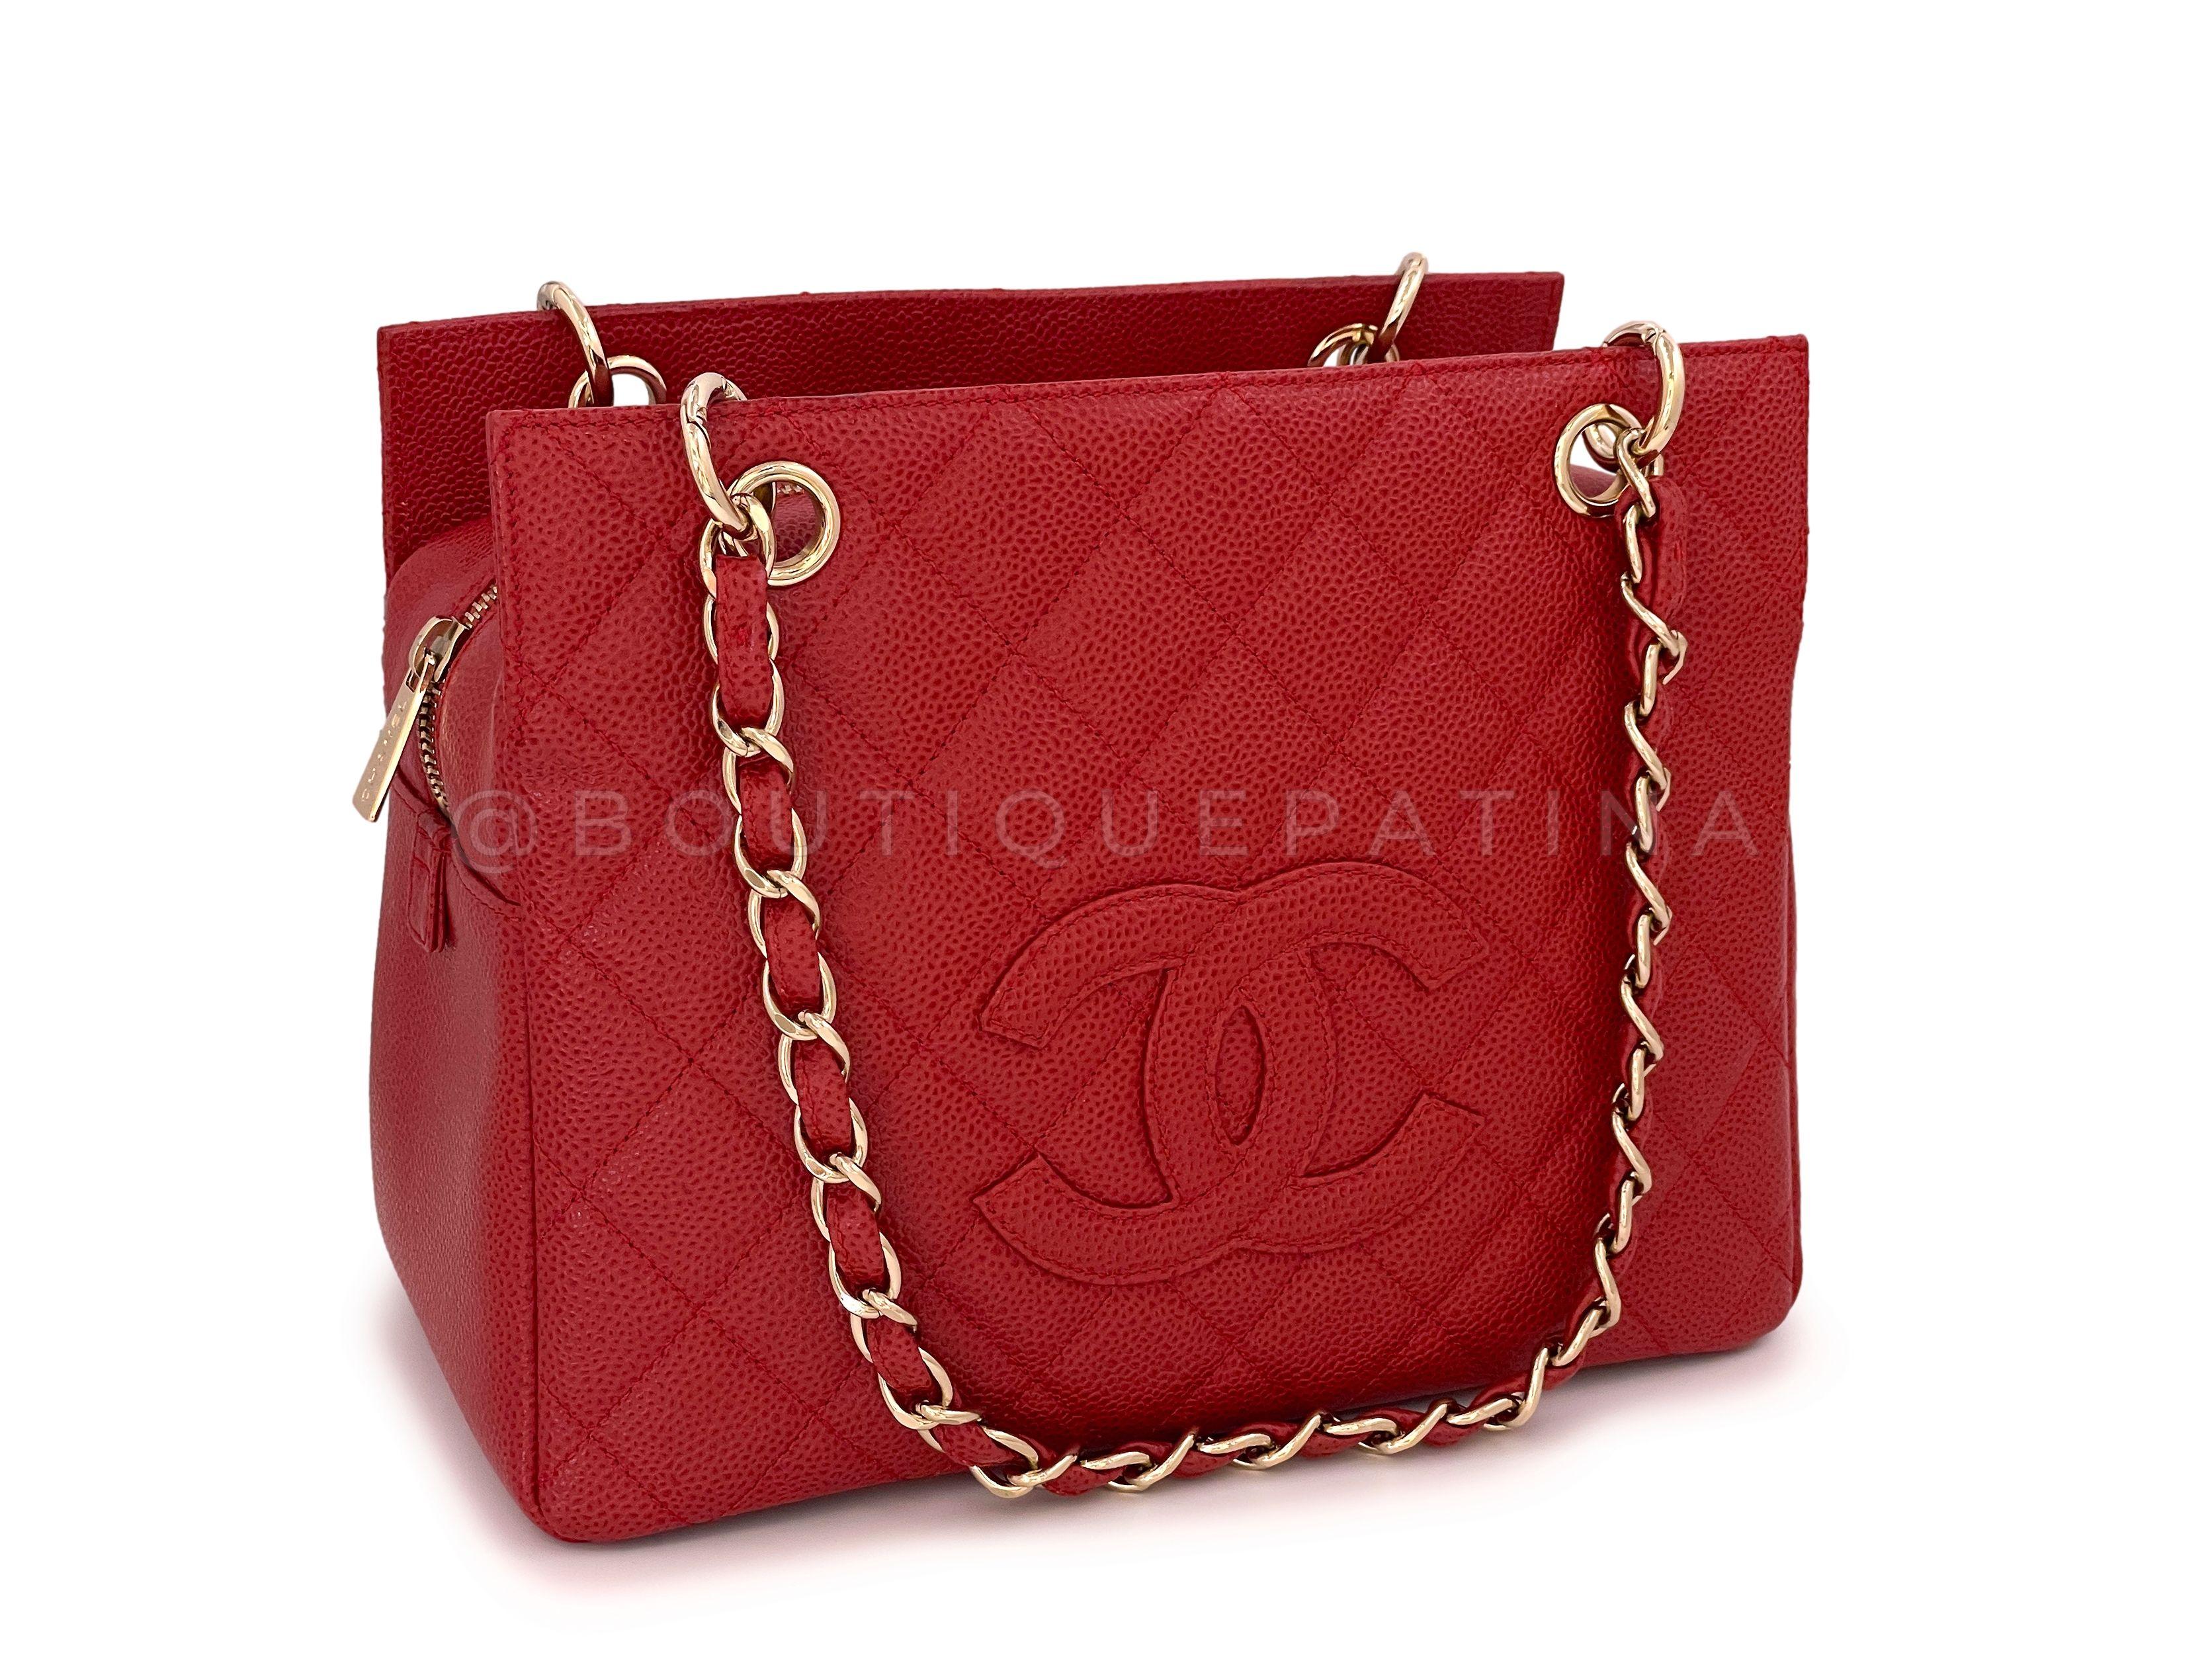 CHANEL Pre-Owned 2007 Petite Timeless Tote Bag - Farfetch